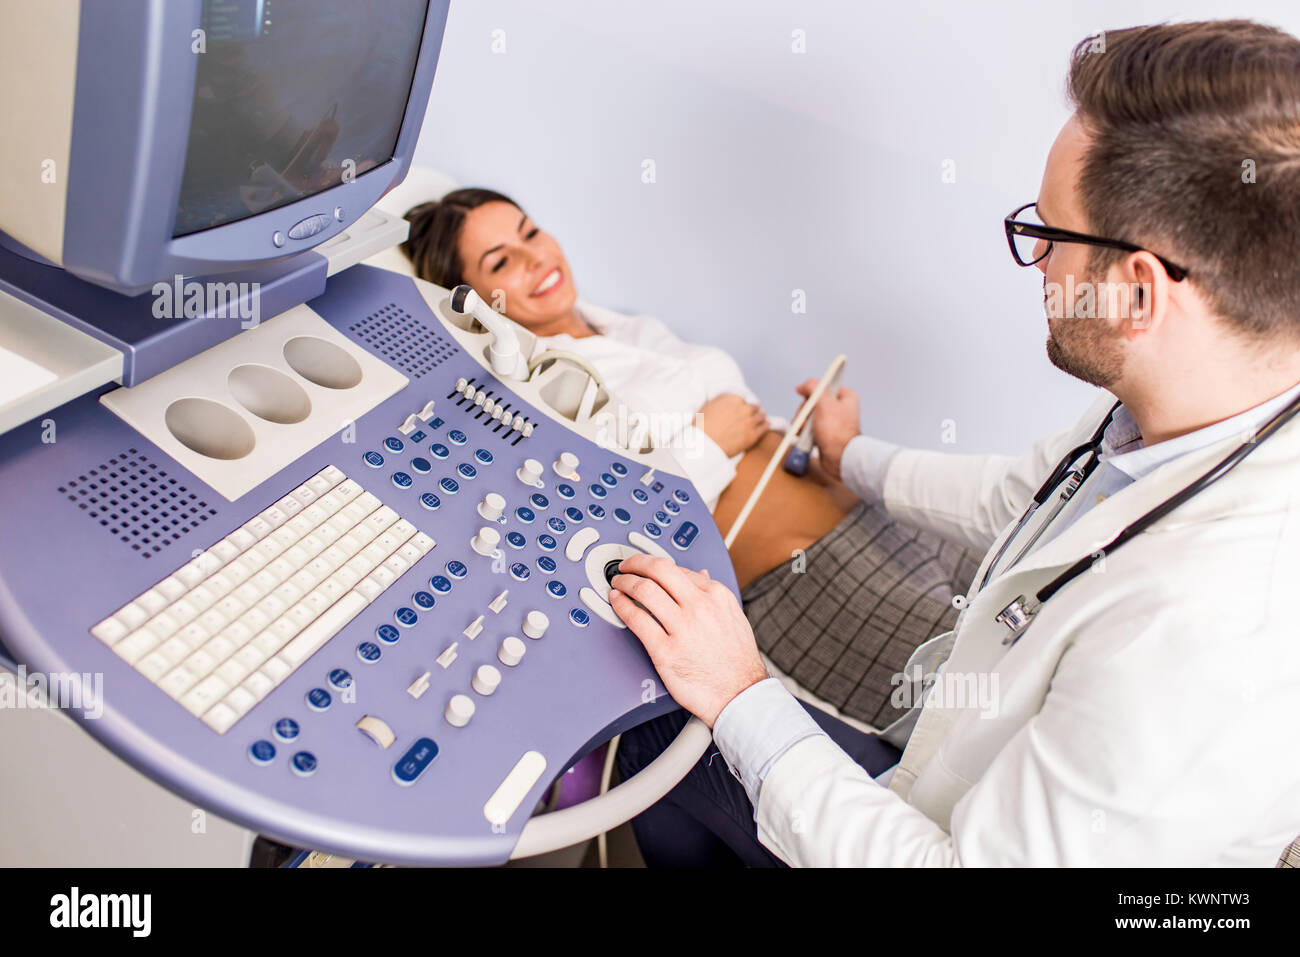 Happy mid adult female patient going through abdomen ultrasound at clinic Stock Photo